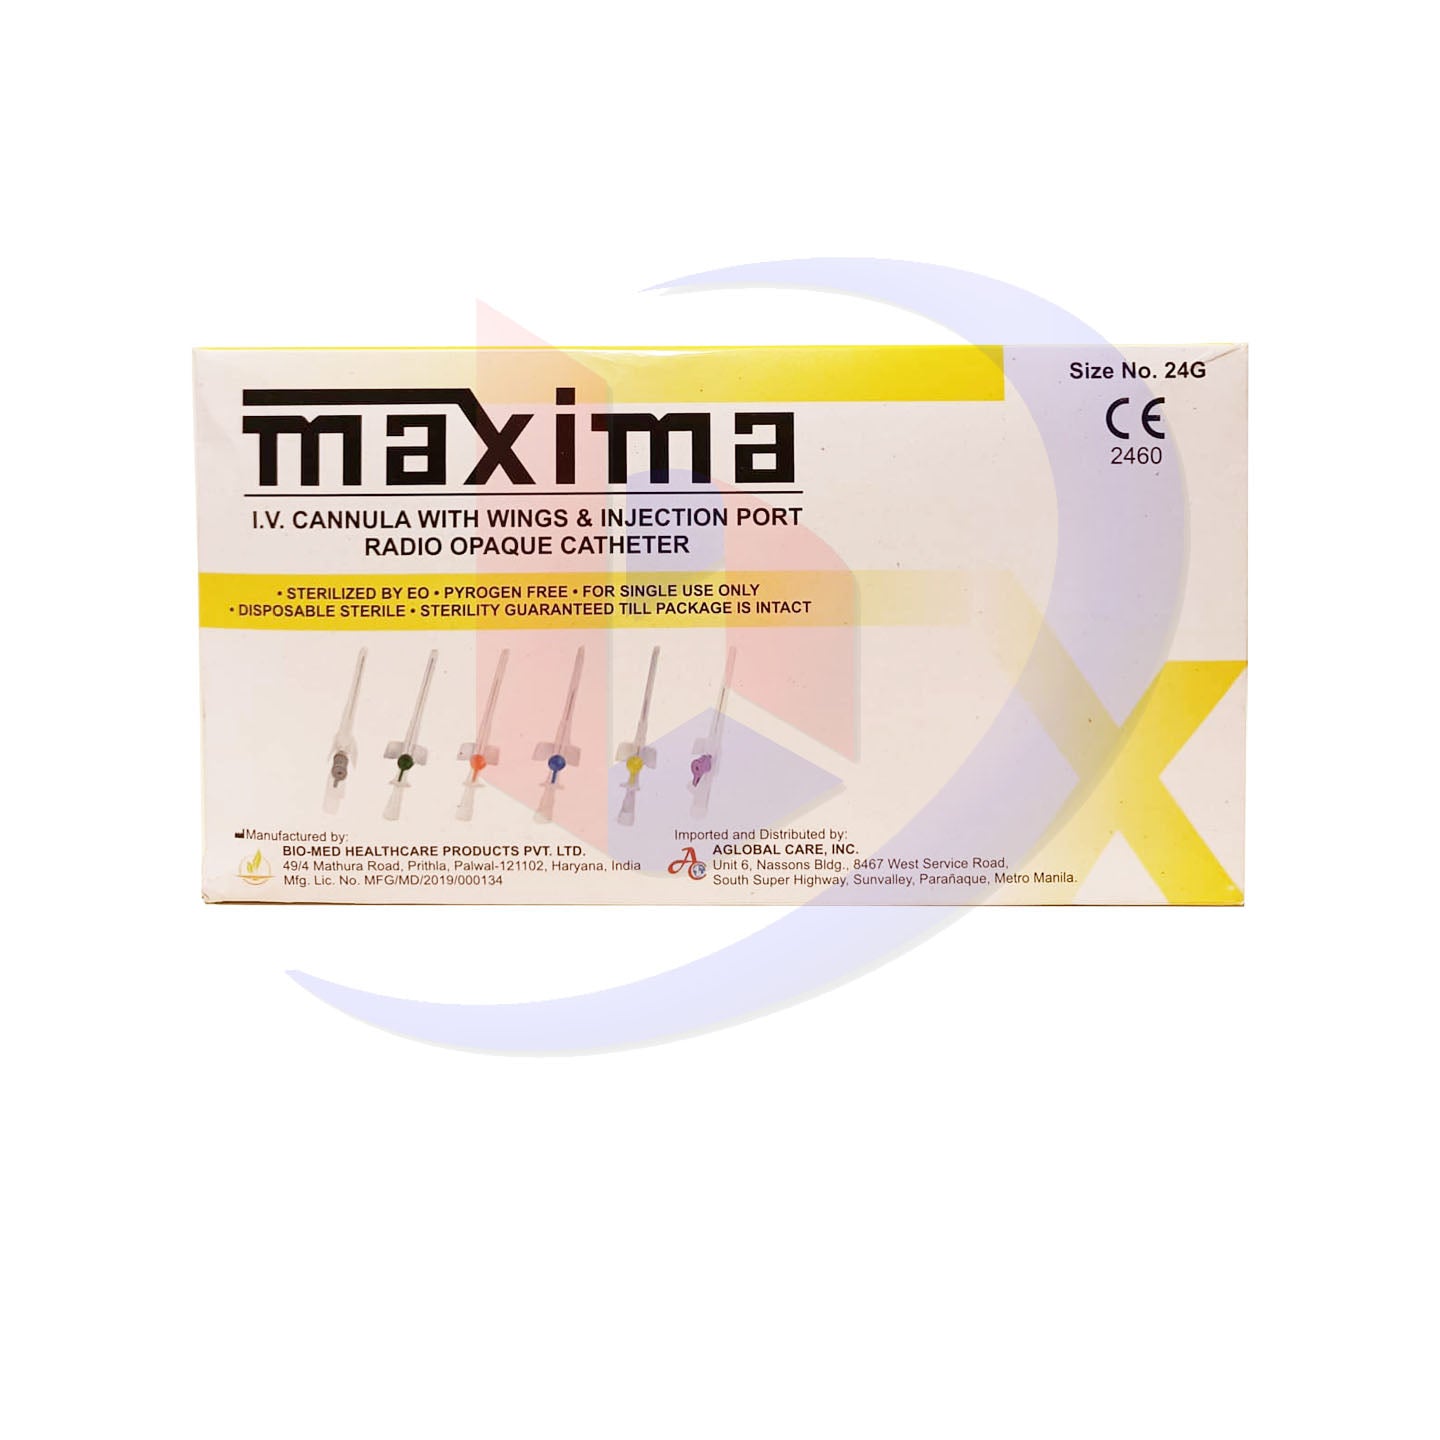 IV Cannula with Wings & Injection Port Radio Opaque Catheter (Maxima) Sterilized by EO Size No. 24G by 100's